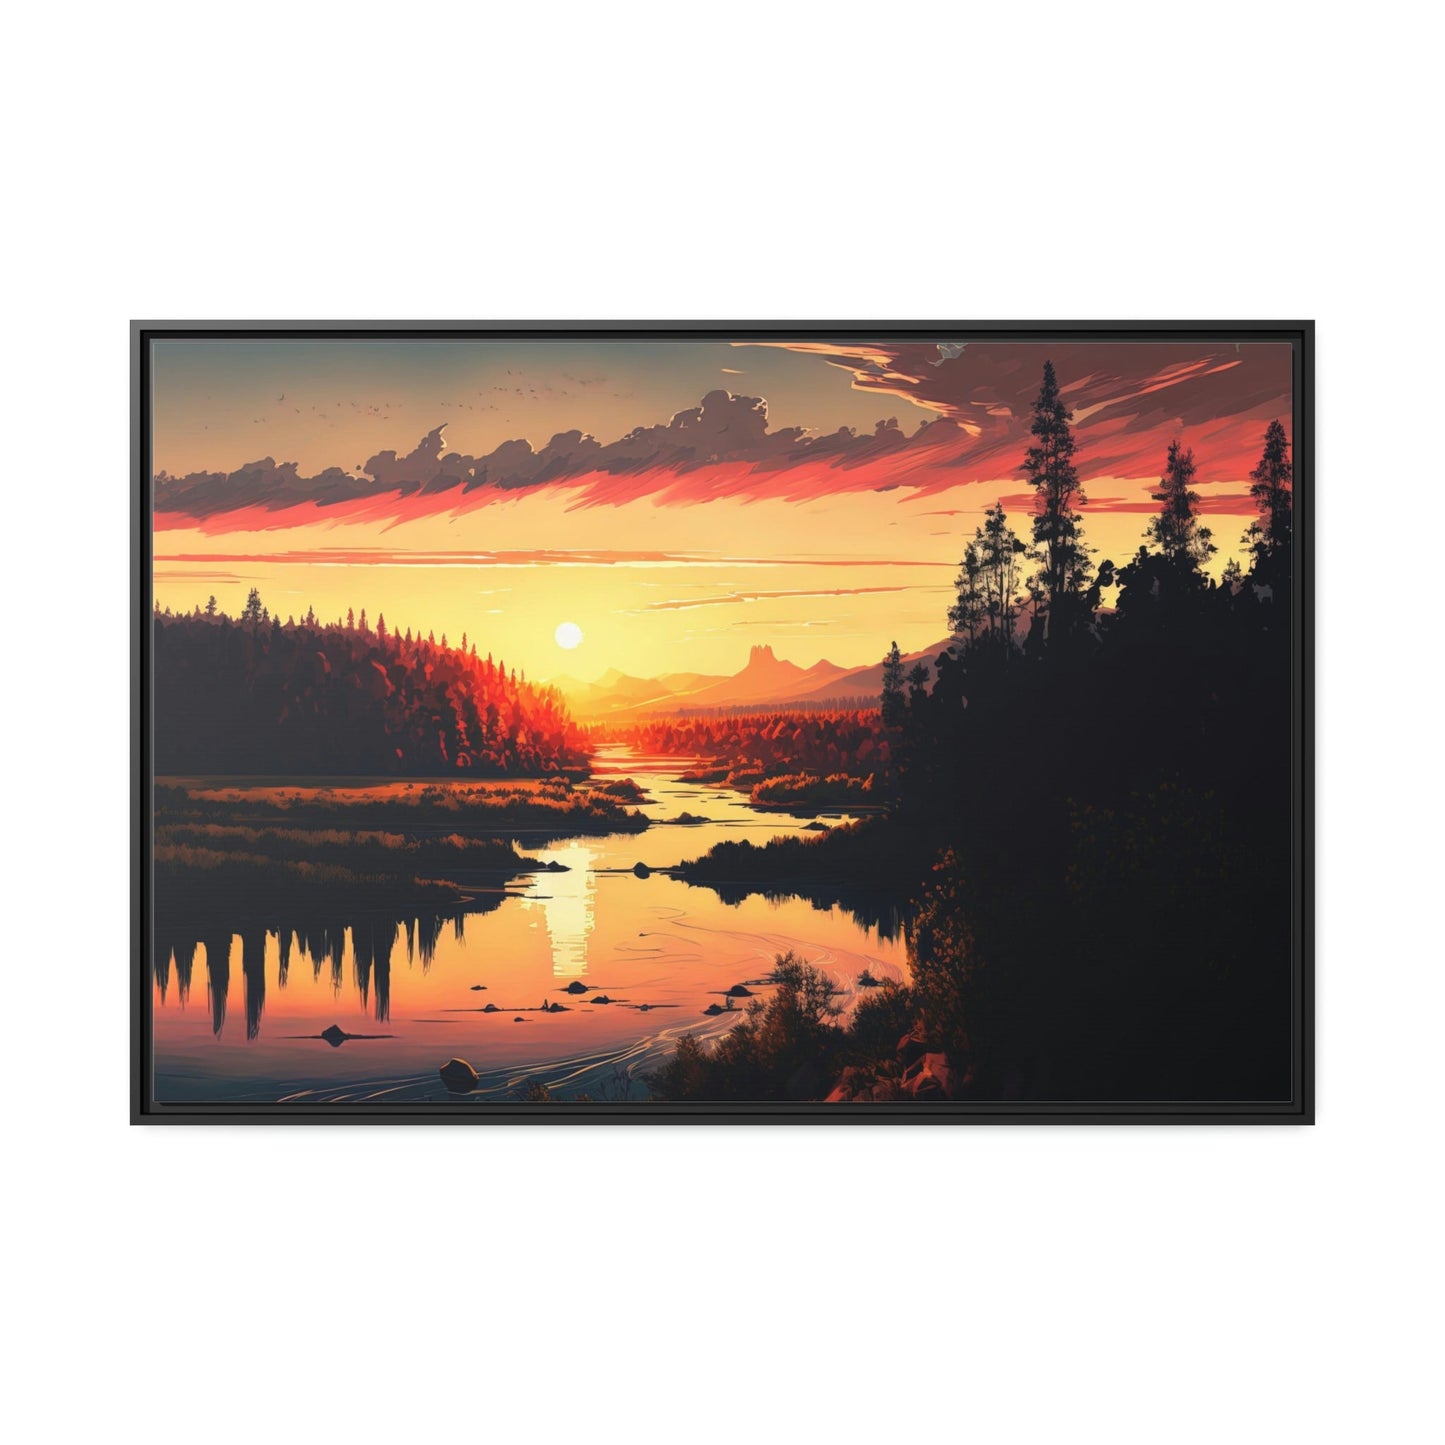 Colors of the River: Natural Canvas Wall Art with Vibrant River Scenery